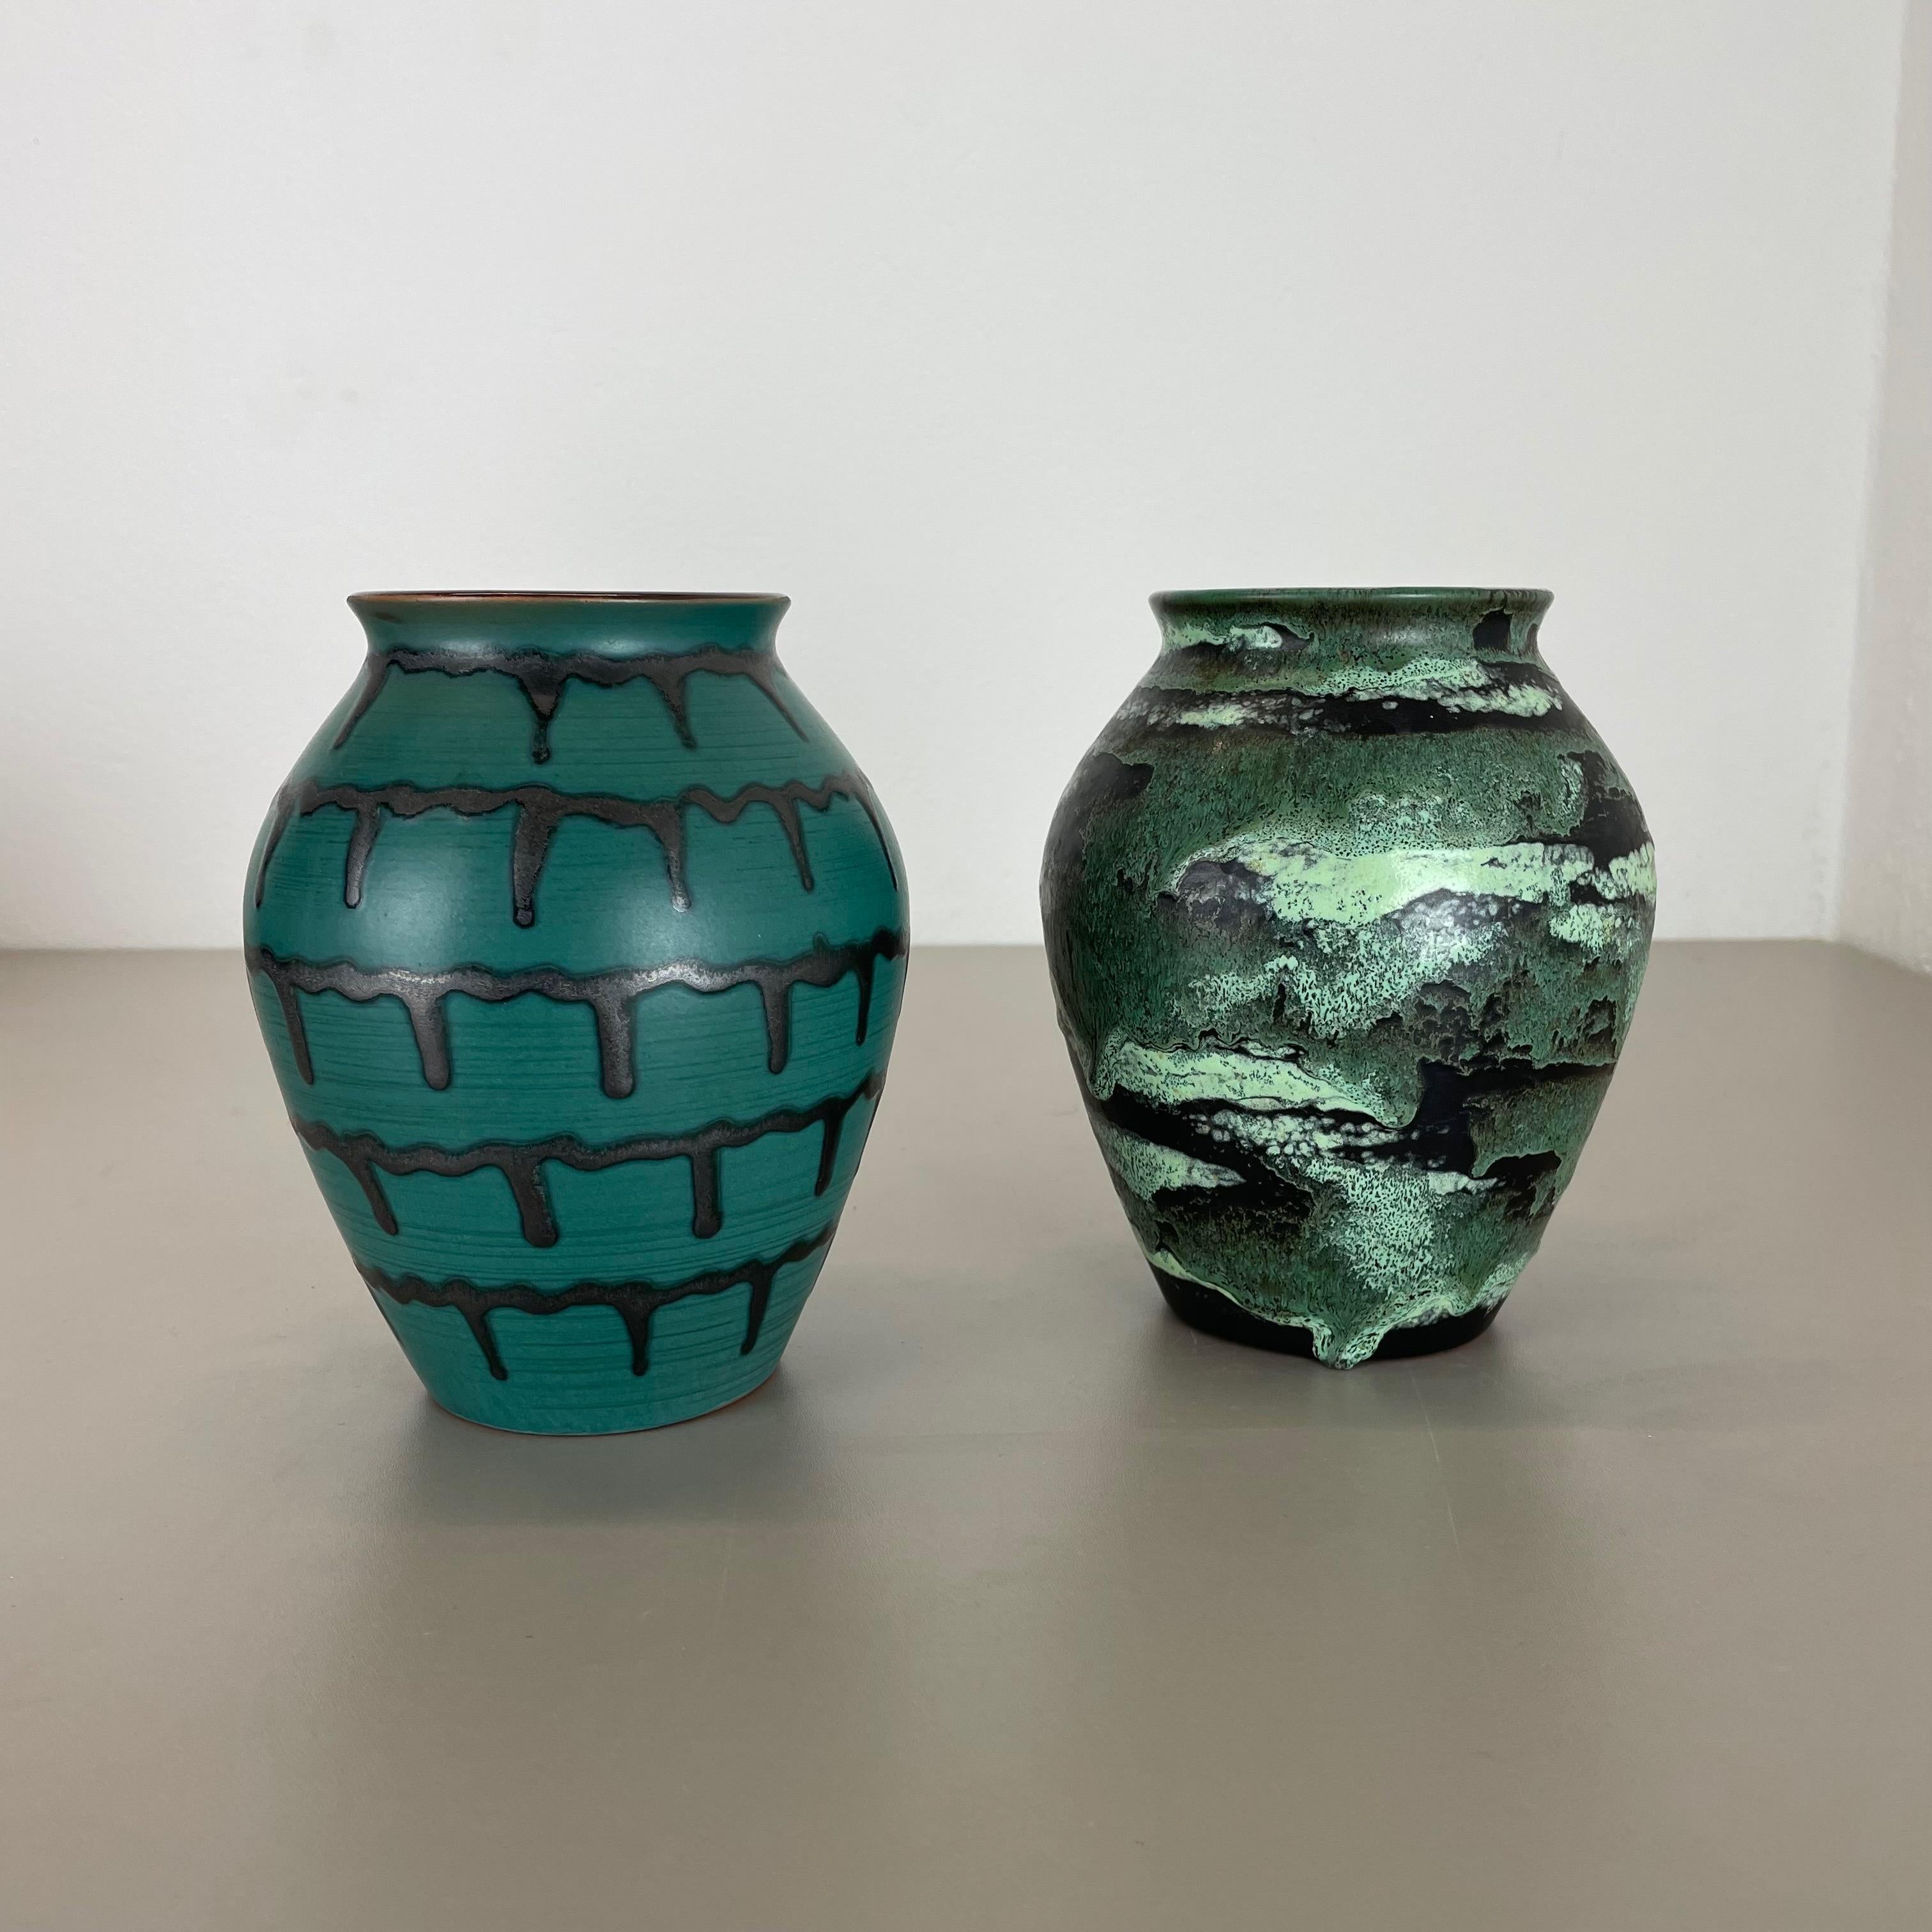 Article:

Ceramic pottery vases set of 2


Origin:

Germany


Designer:

Heinz Siery


Producer:

Carstens Tönnieshof, Germany


Decade:

1970s


This original vintage pottery object was designed by Heinz Siery and produced by Cartens Tönnieshof